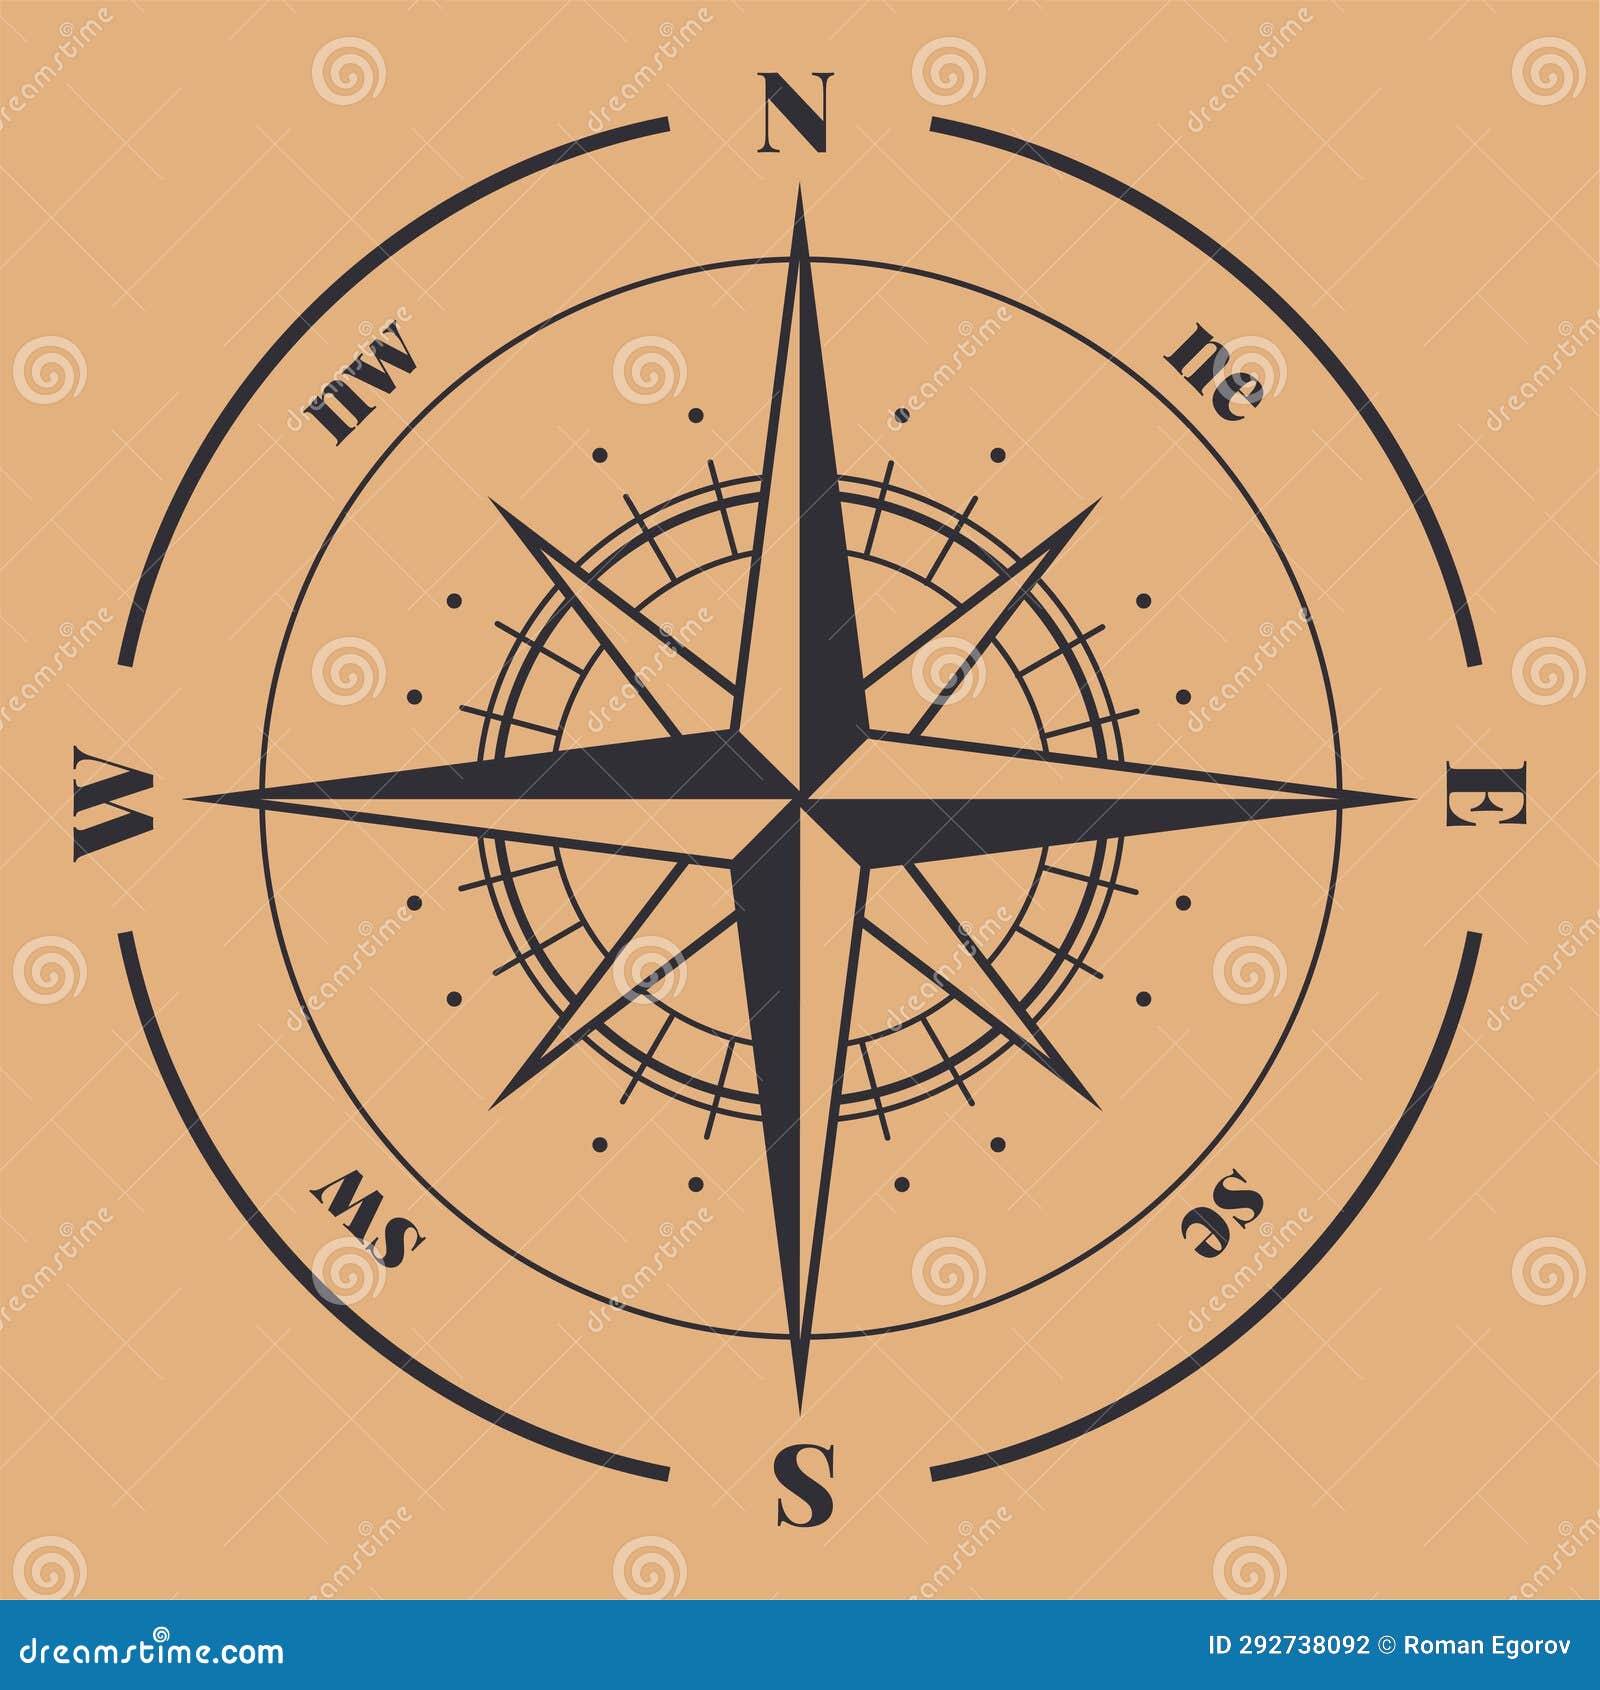 compass. wind rose with north orientation, sea navigational equipment antique logo. cartographic and geographic contour